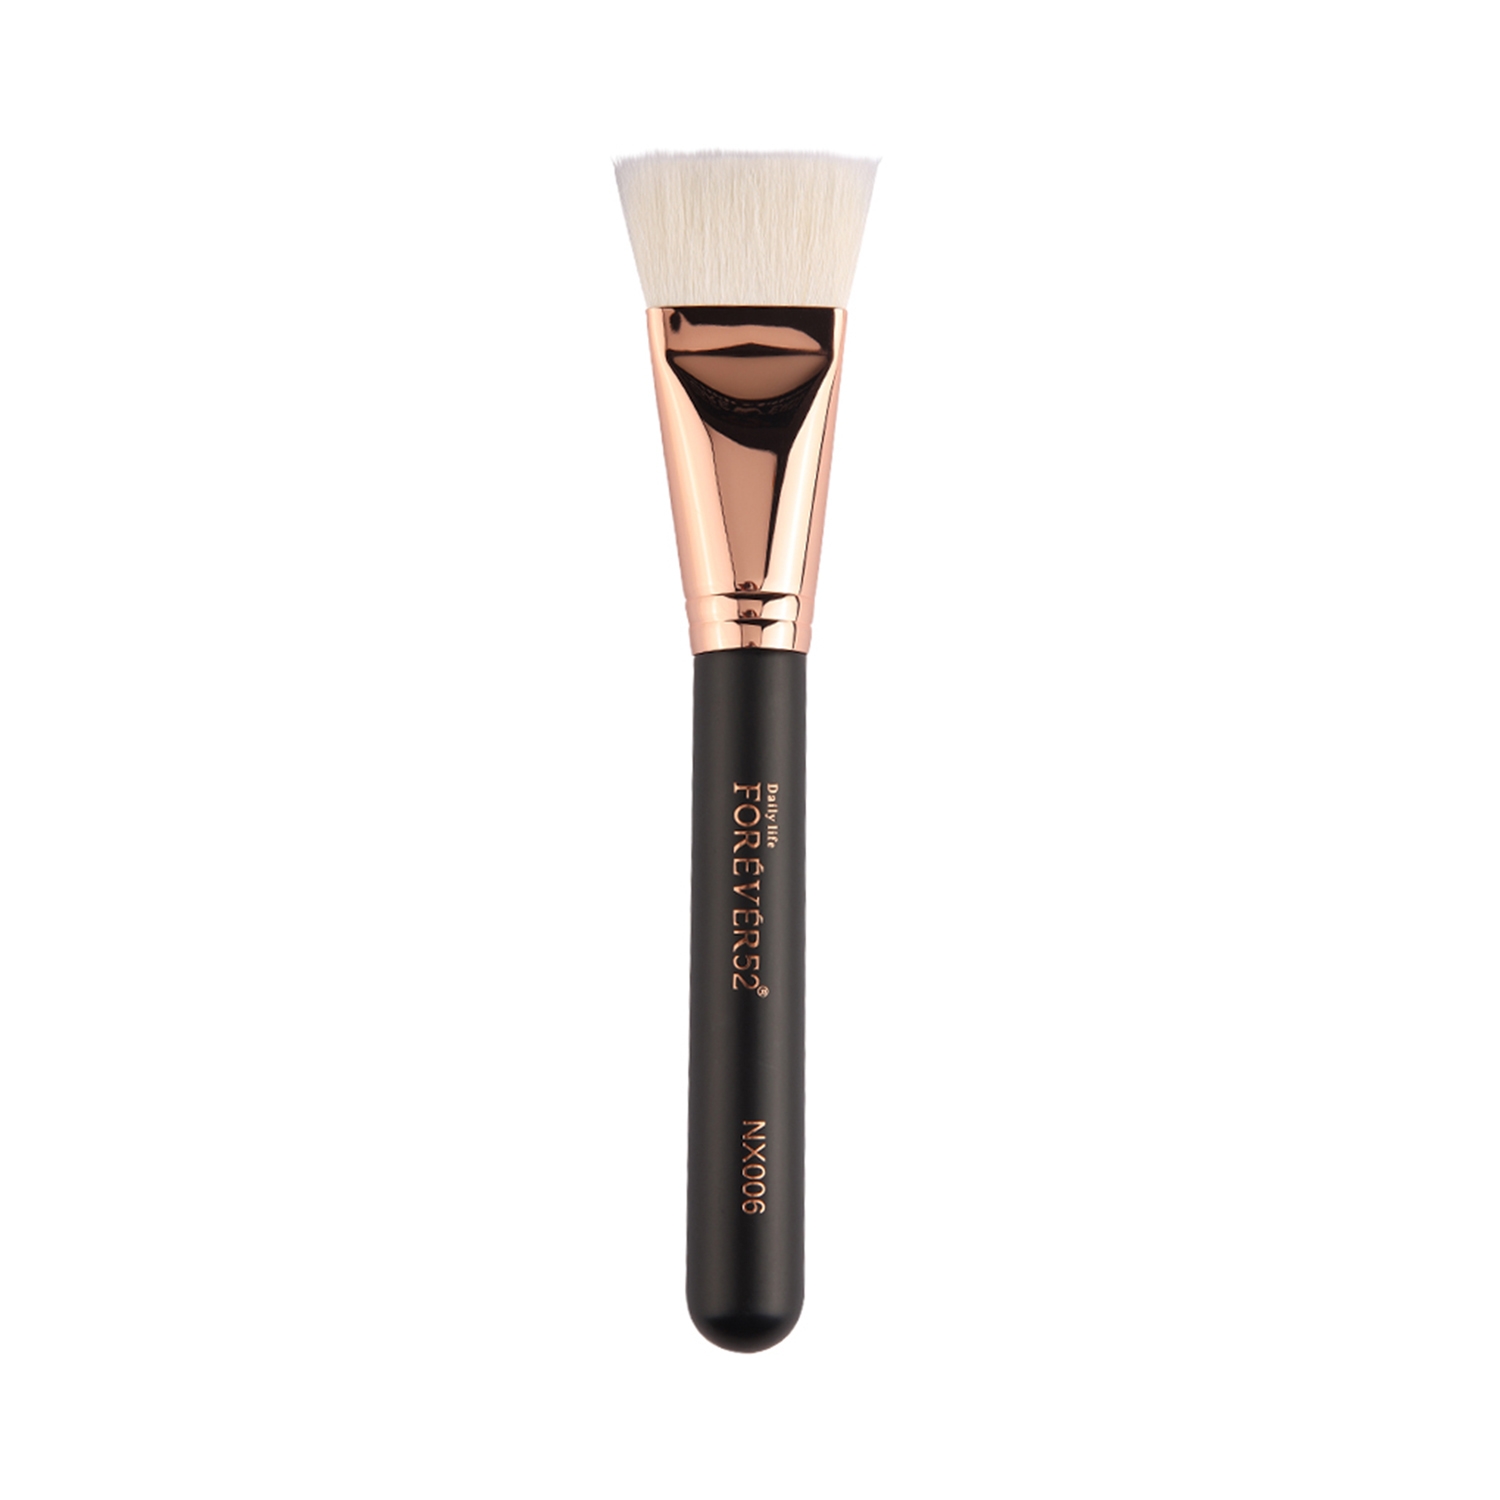 Daily Life Forever52 | Daily Life Forever52 Contour Brush - NX006 (1Pc)